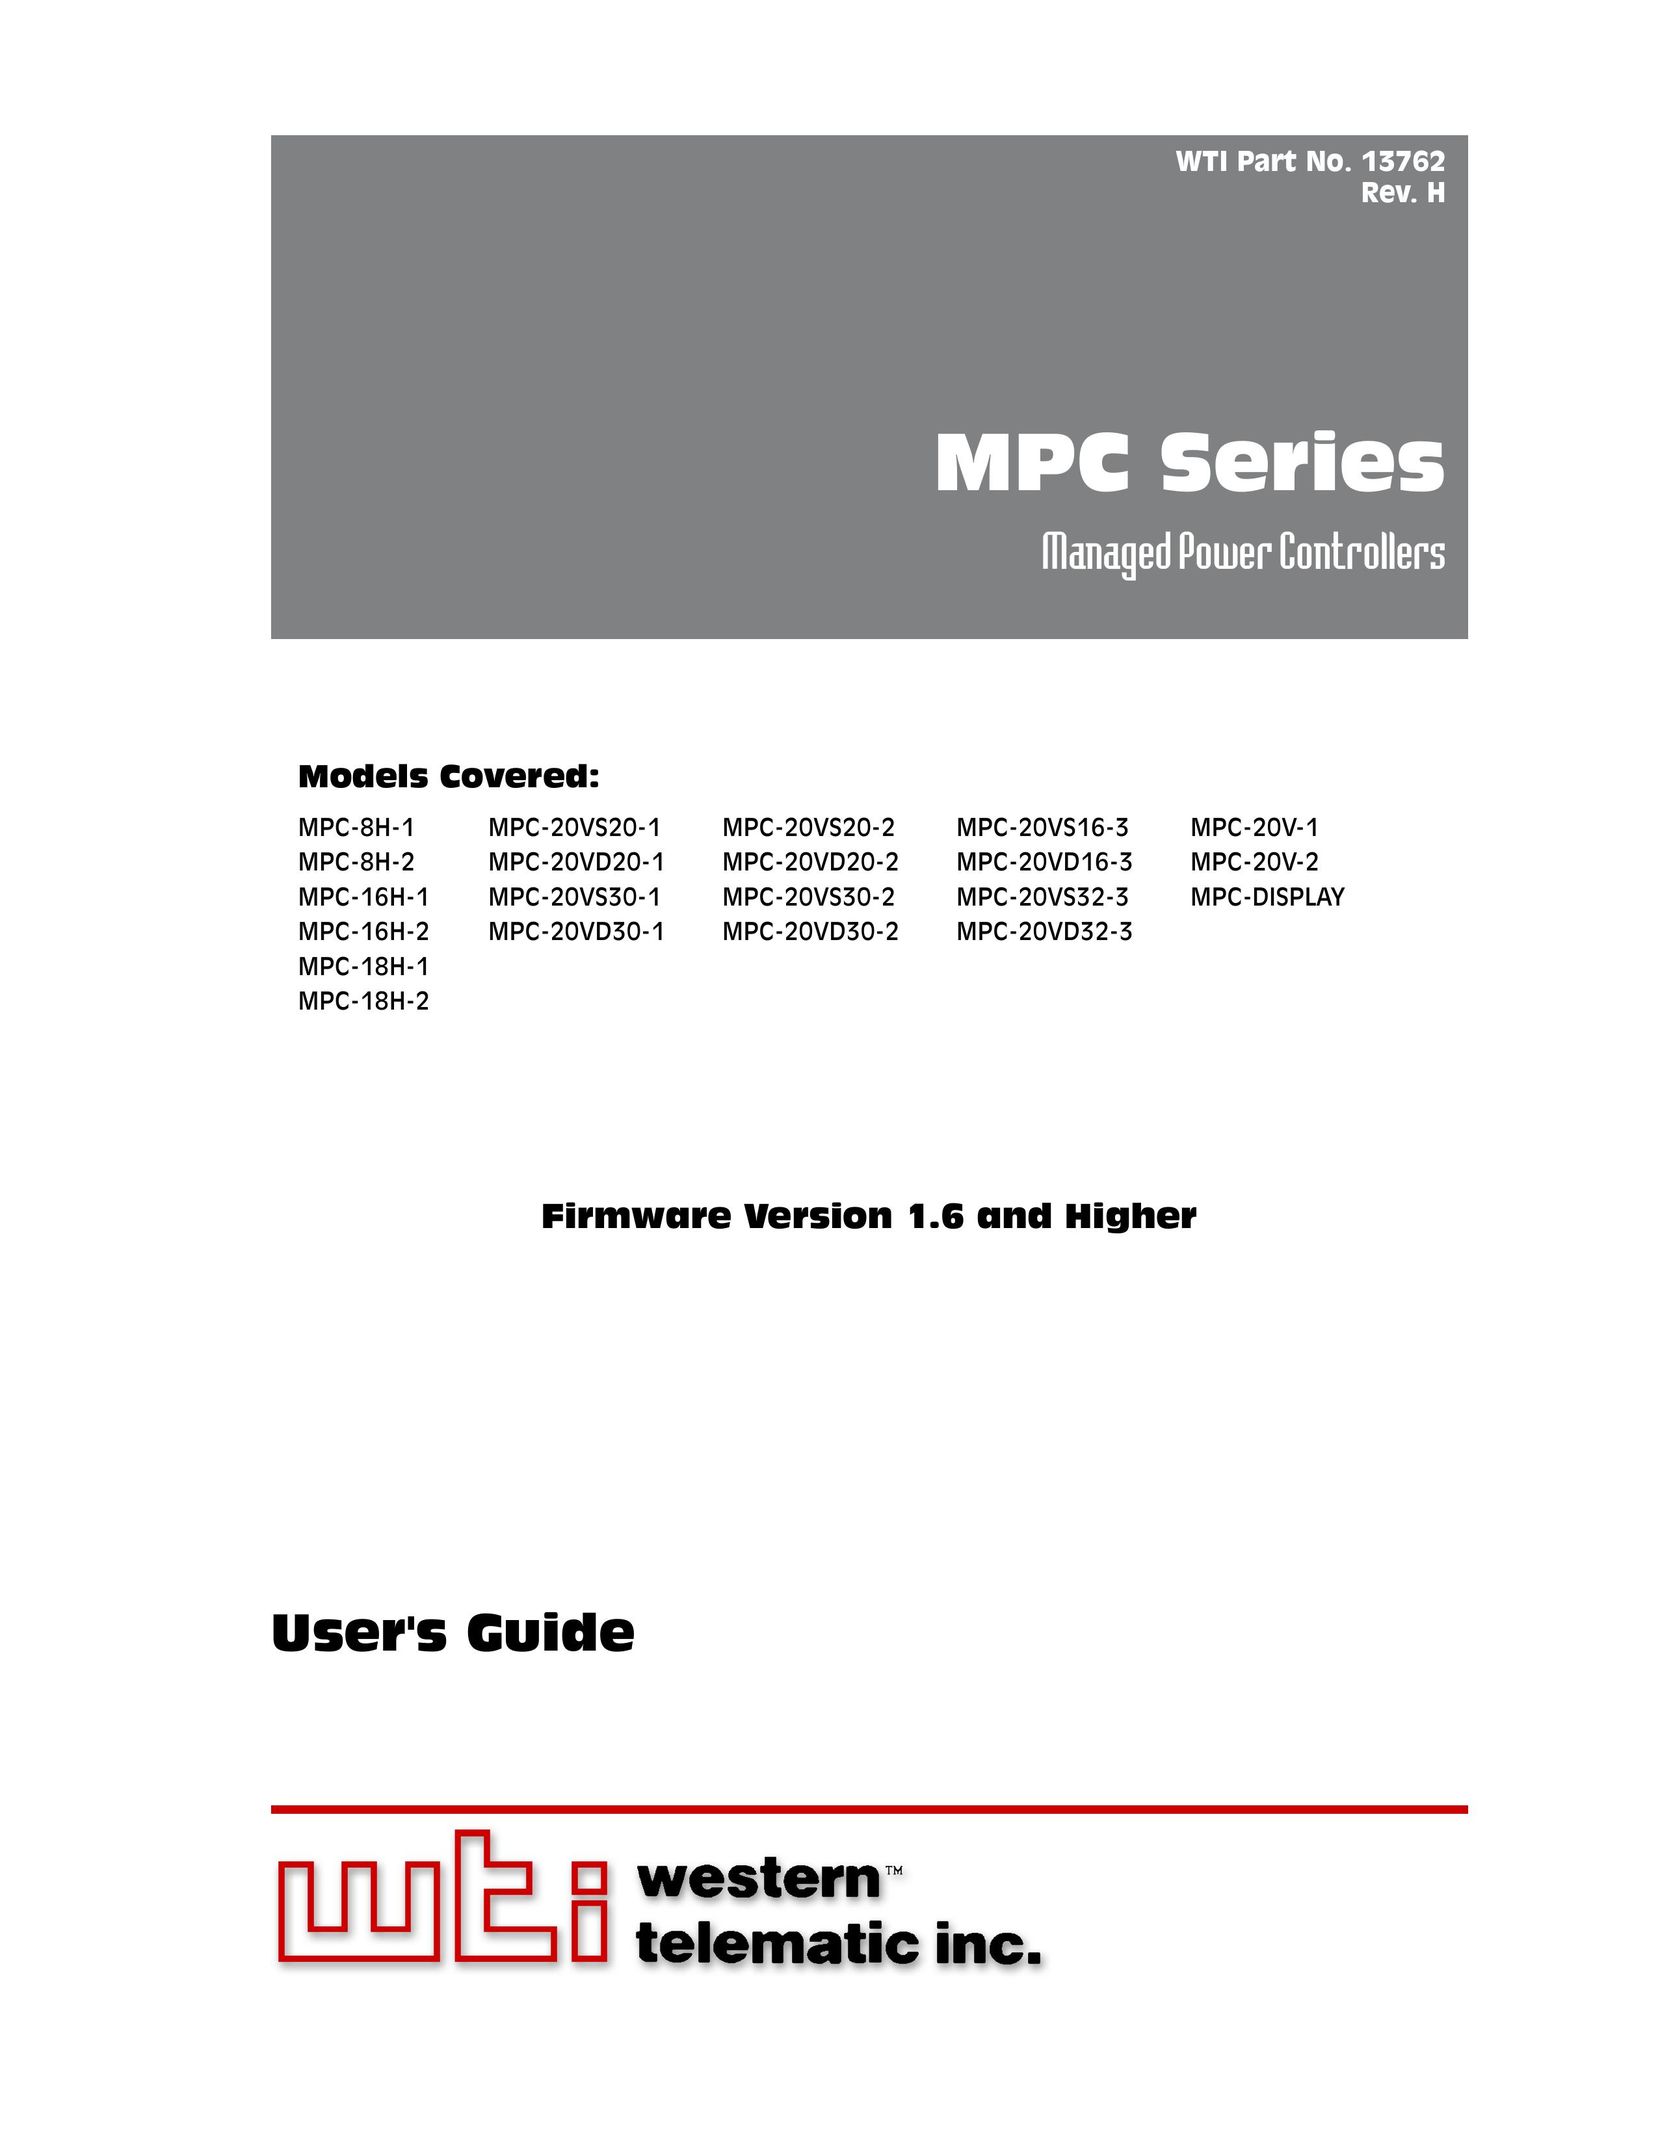 Western Telematic MPC-DISPLAY Network Card User Manual (Page 1)